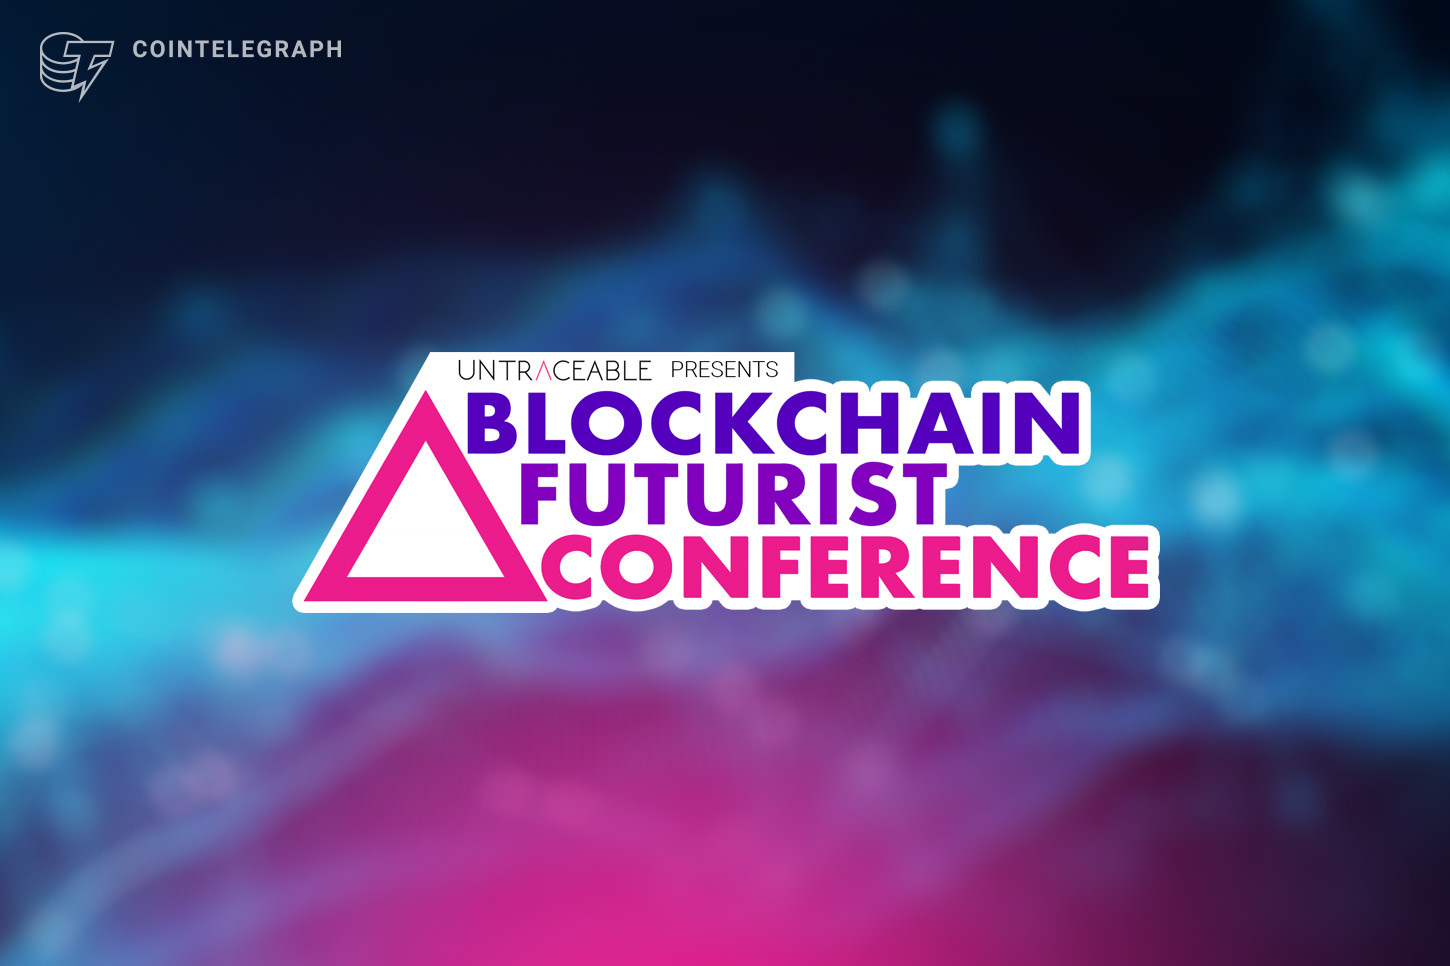 Blockchain Futurist Conference — Canada’s biggest crypto conference returns for fifth year